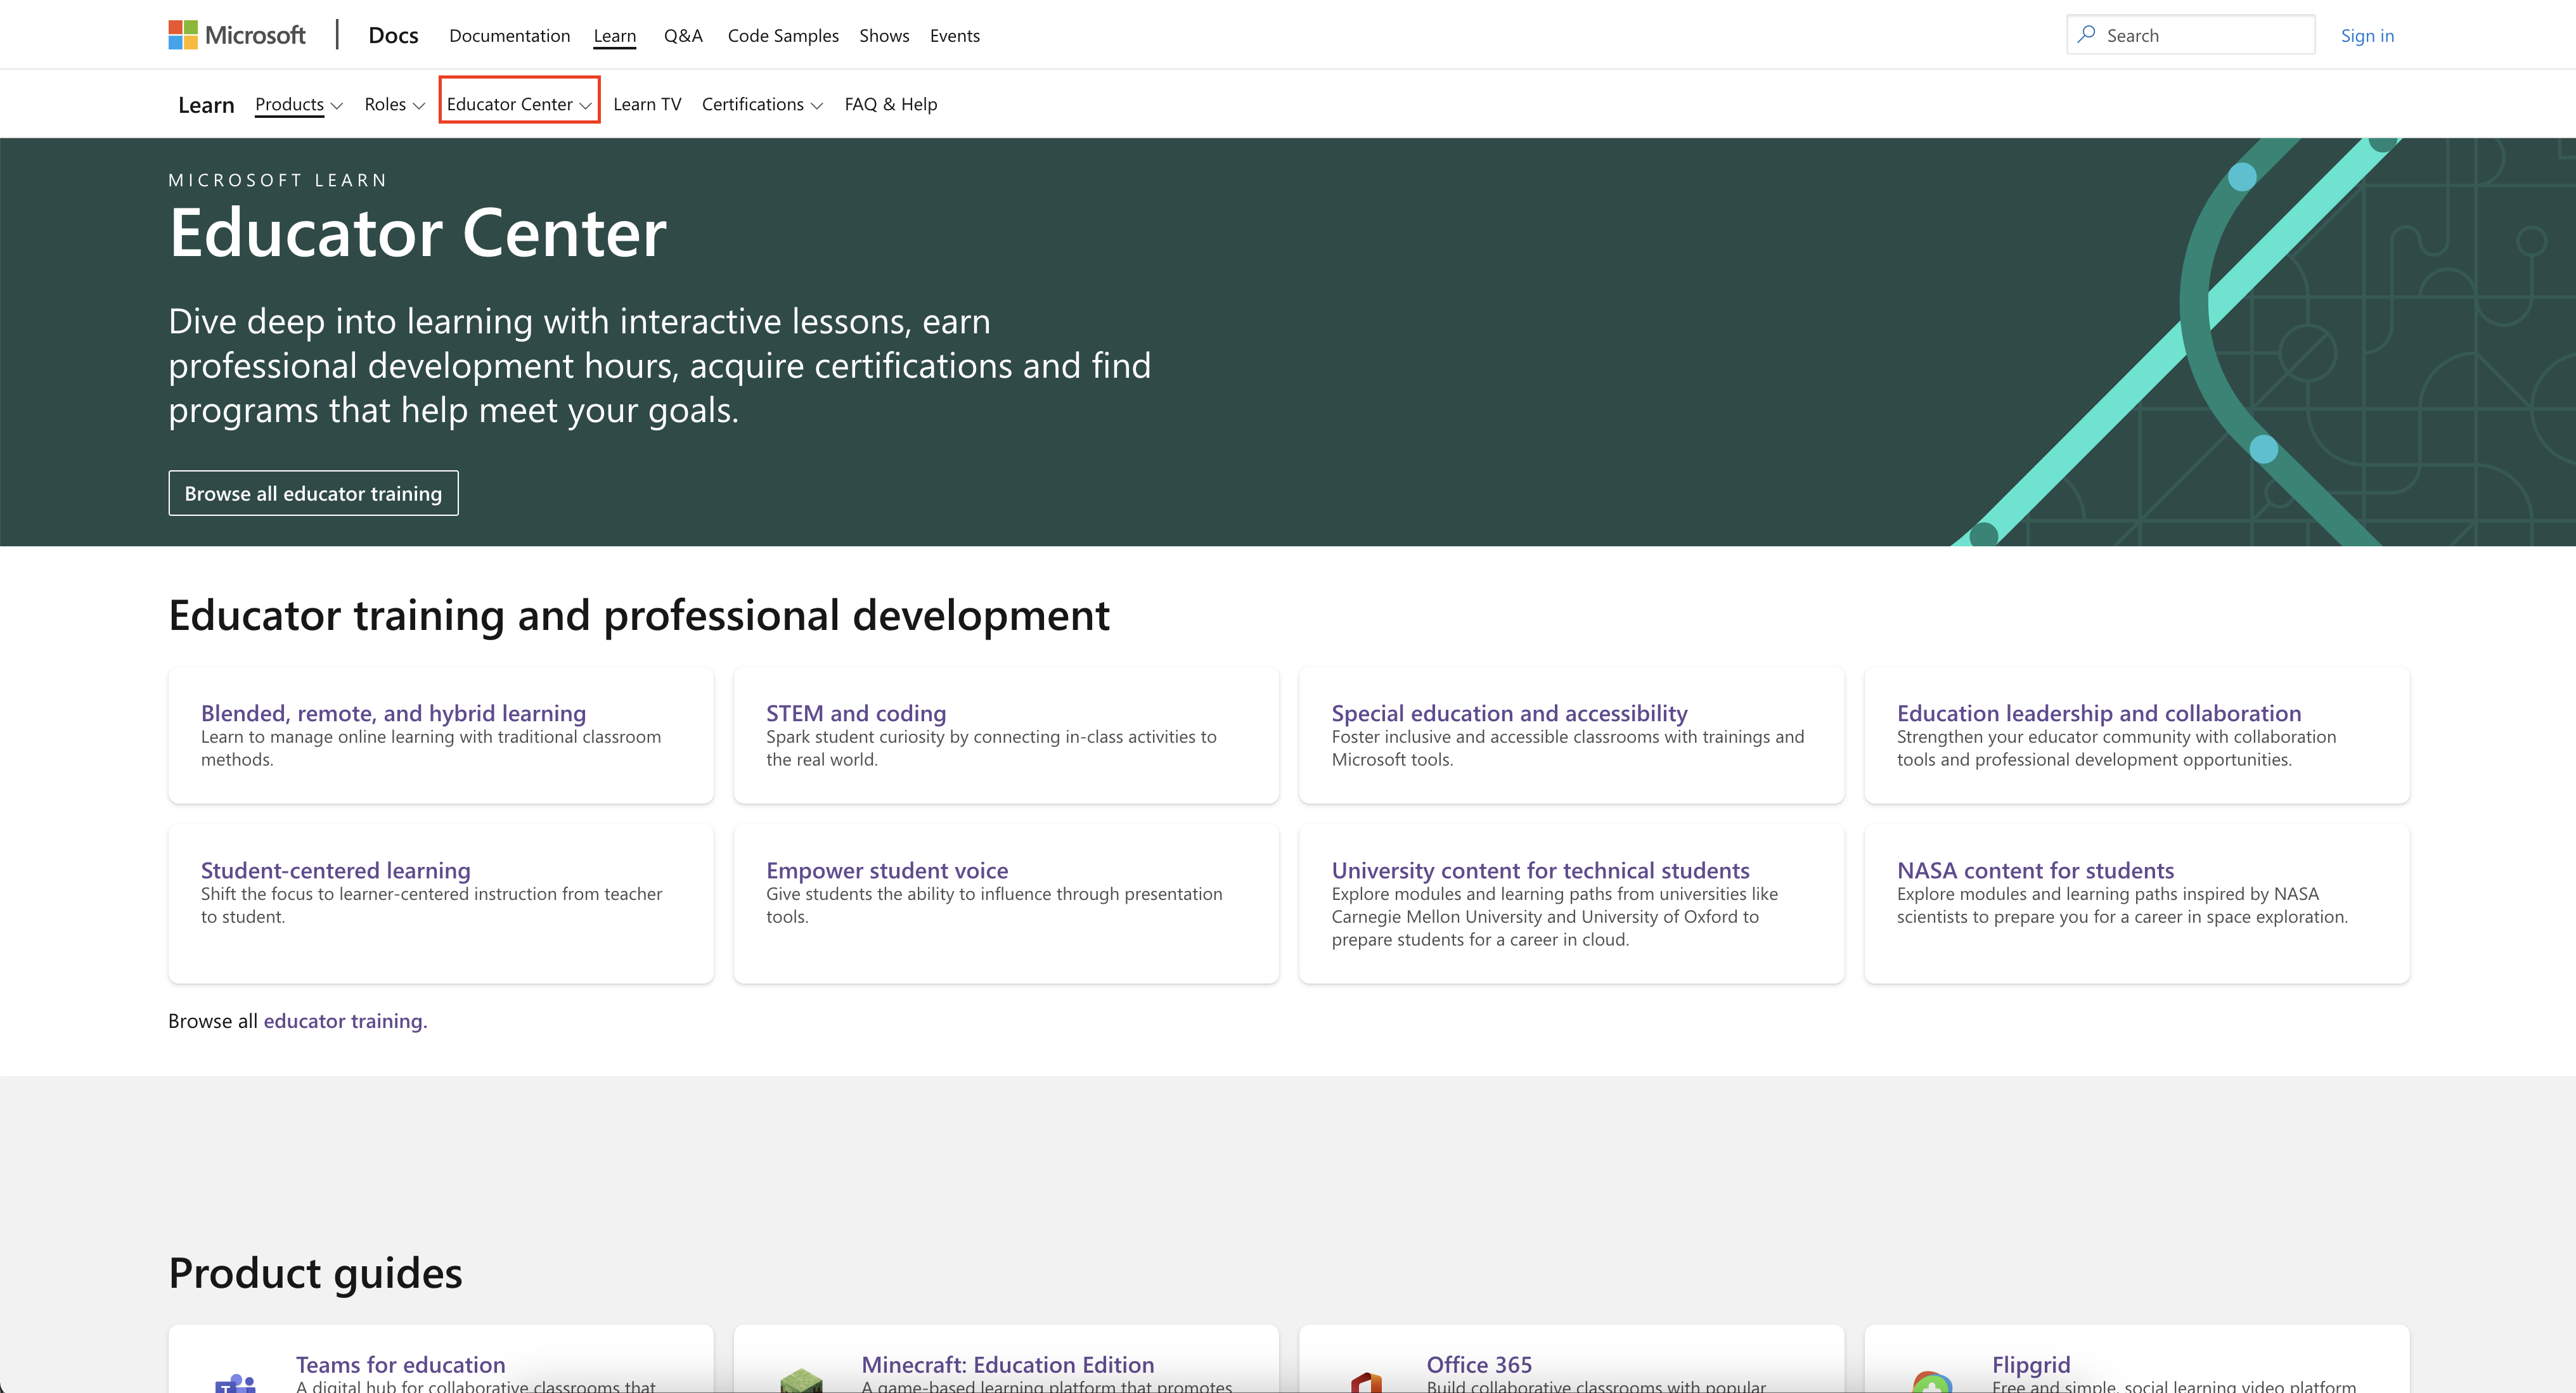 Screenshot of the Microsoft Learn Educator Center overview page with Educator Center highlighted in the navigation